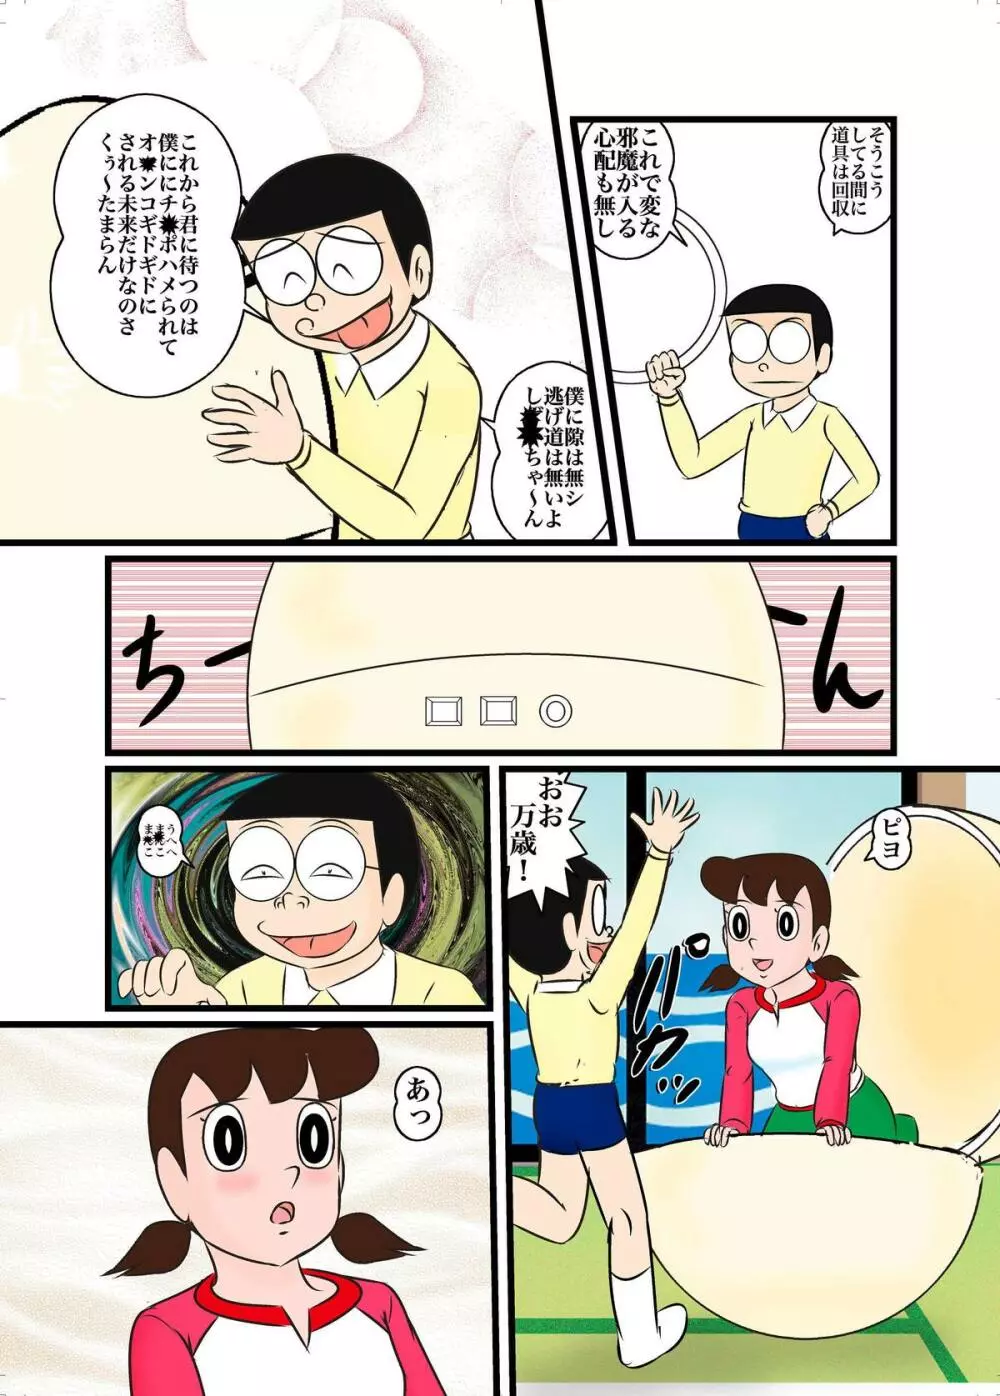 SちゃんR - page6